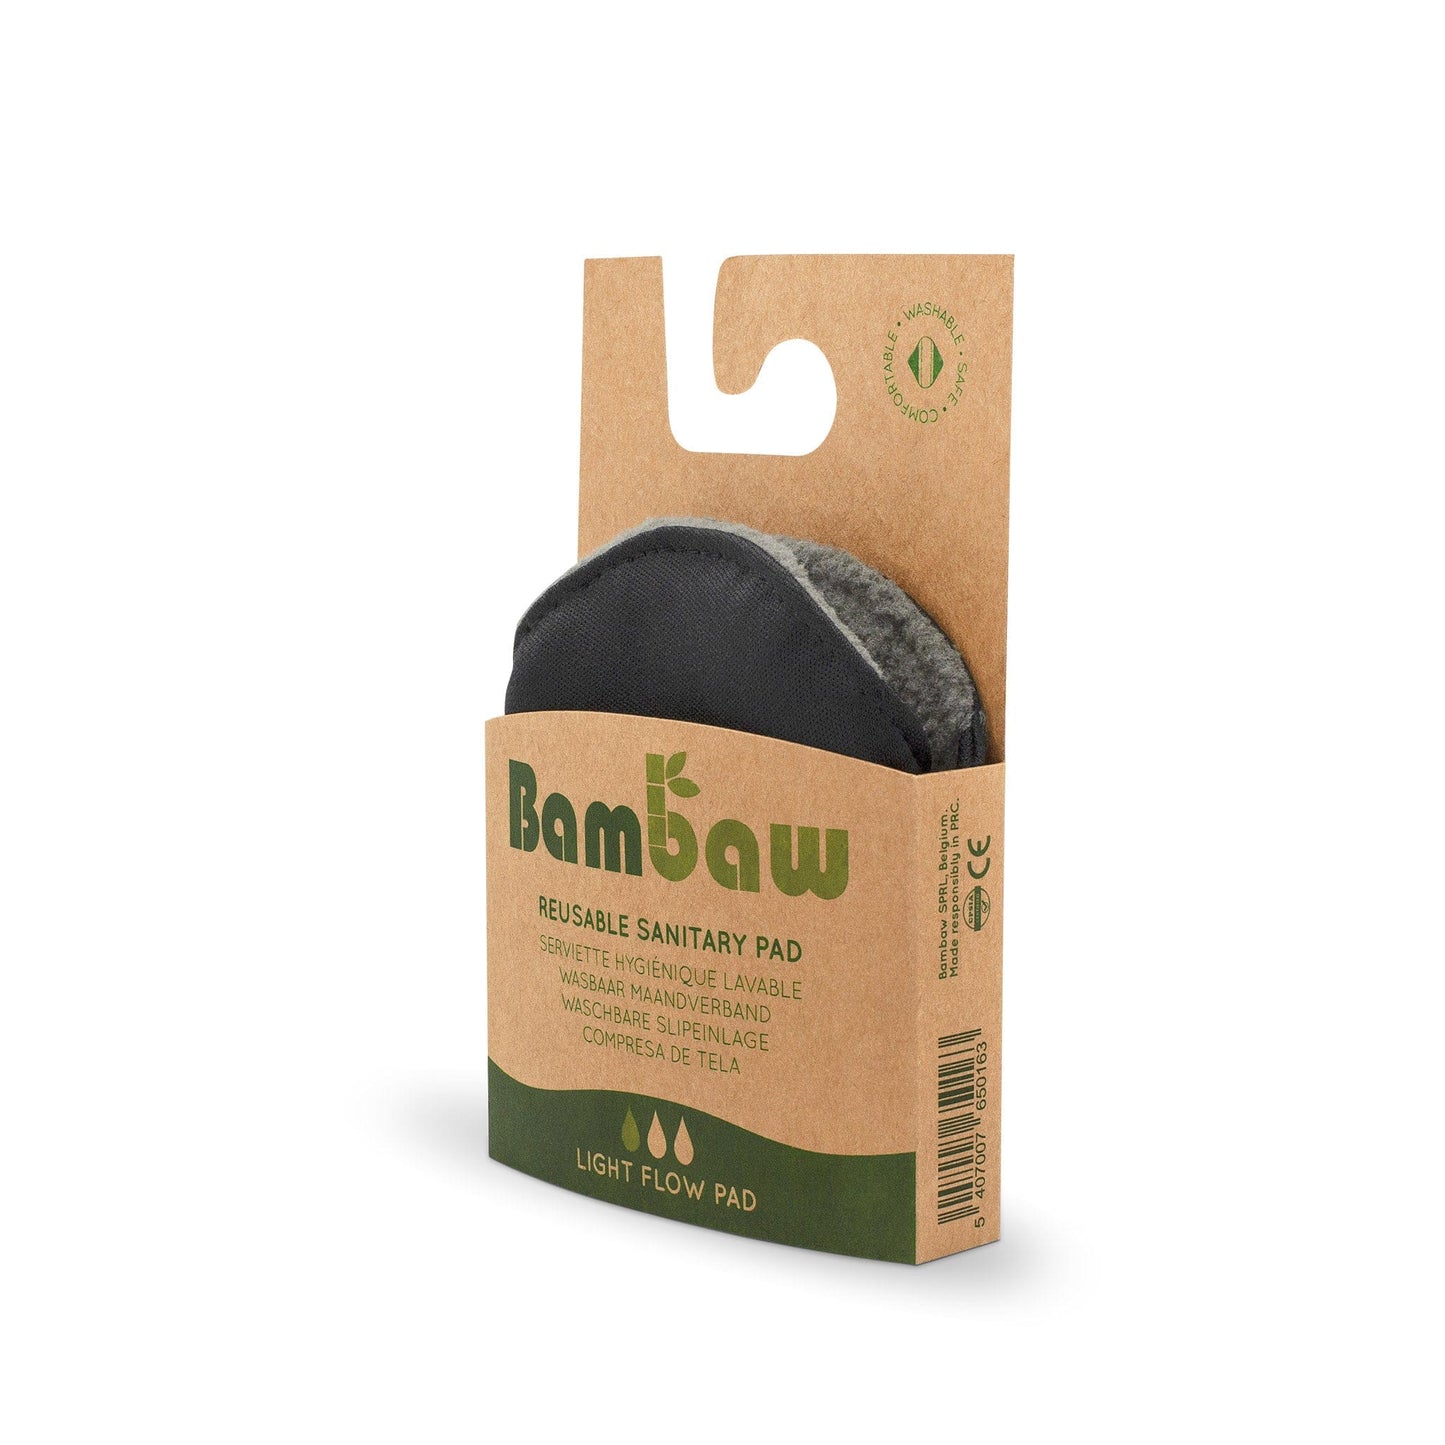 Bambaw Period Products Bamboo Charcoal Reusable Period Pad - Bambaw